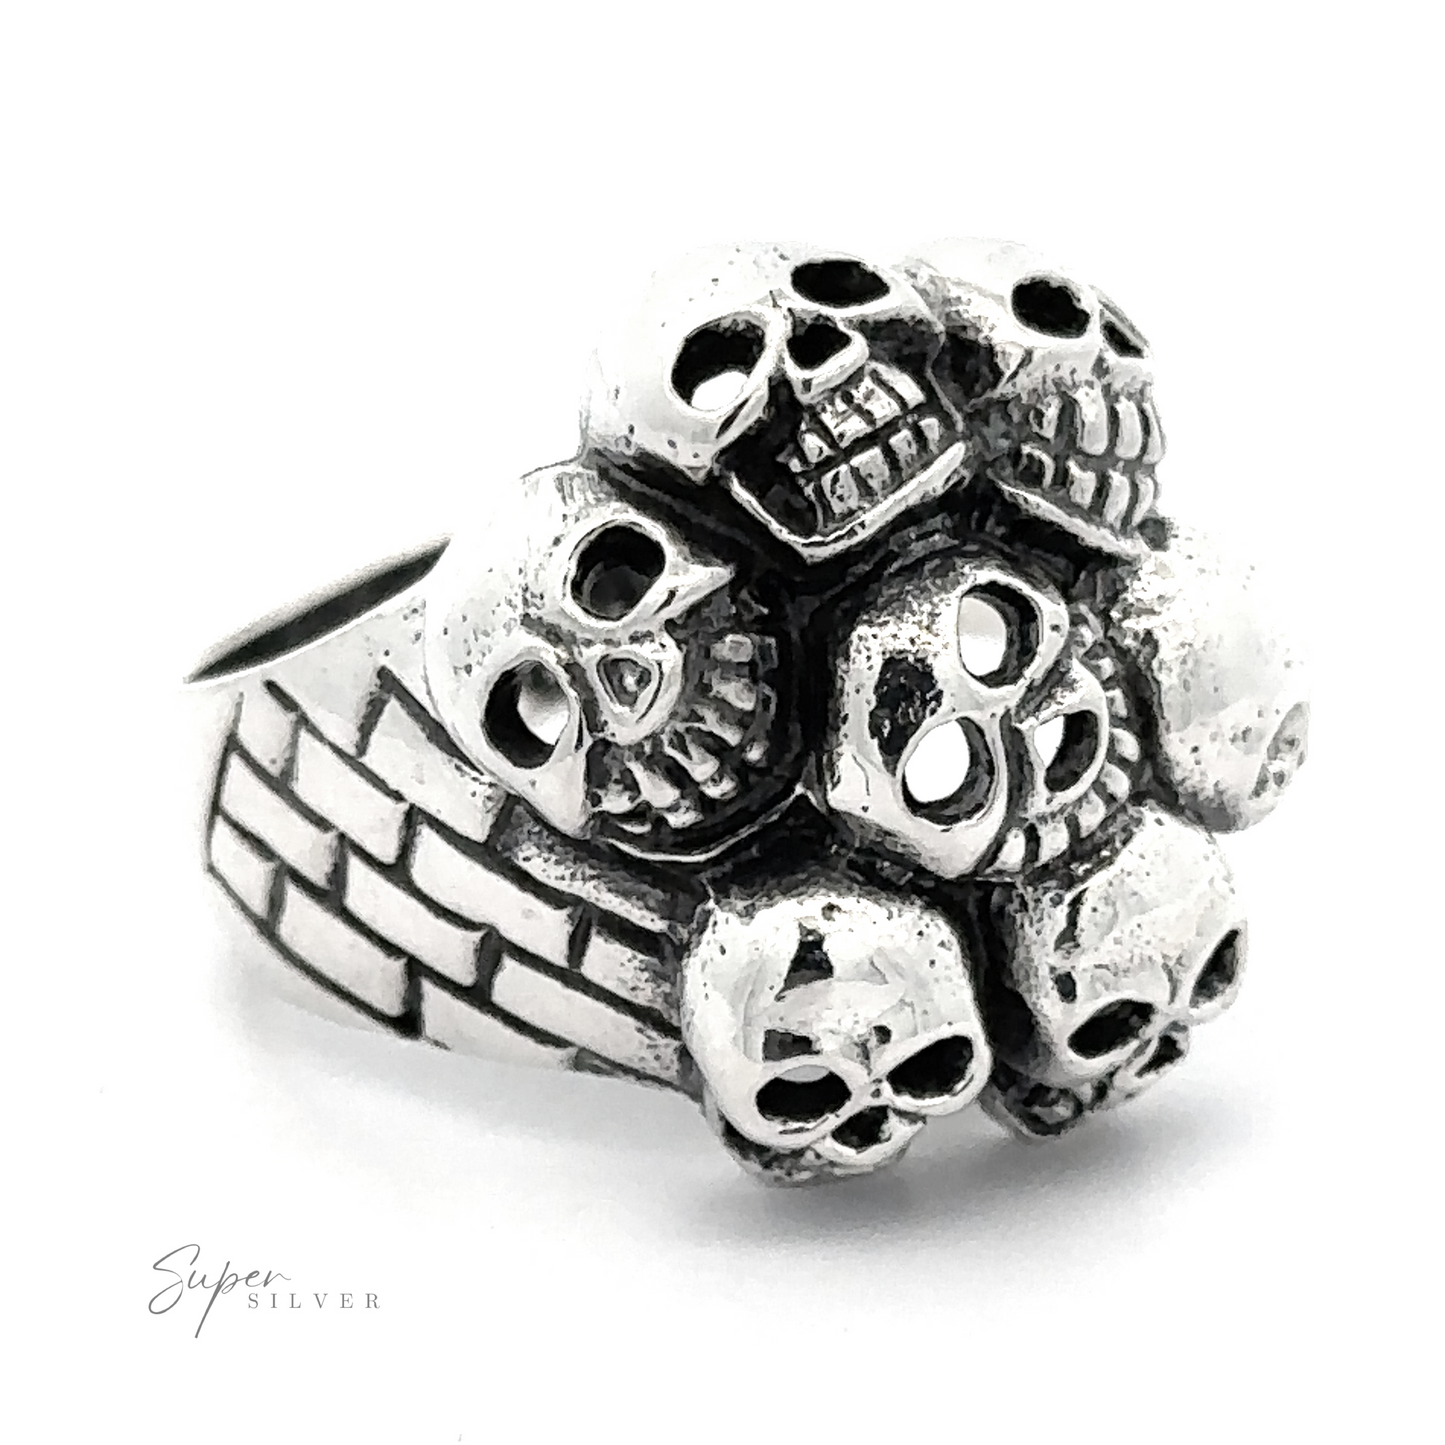 A Seven Grinning Skulls Ring, featuring a cluster of intricately detailed skulls on the front. The band has a textured pattern, showcasing unique craftsmanship and distinctive style.